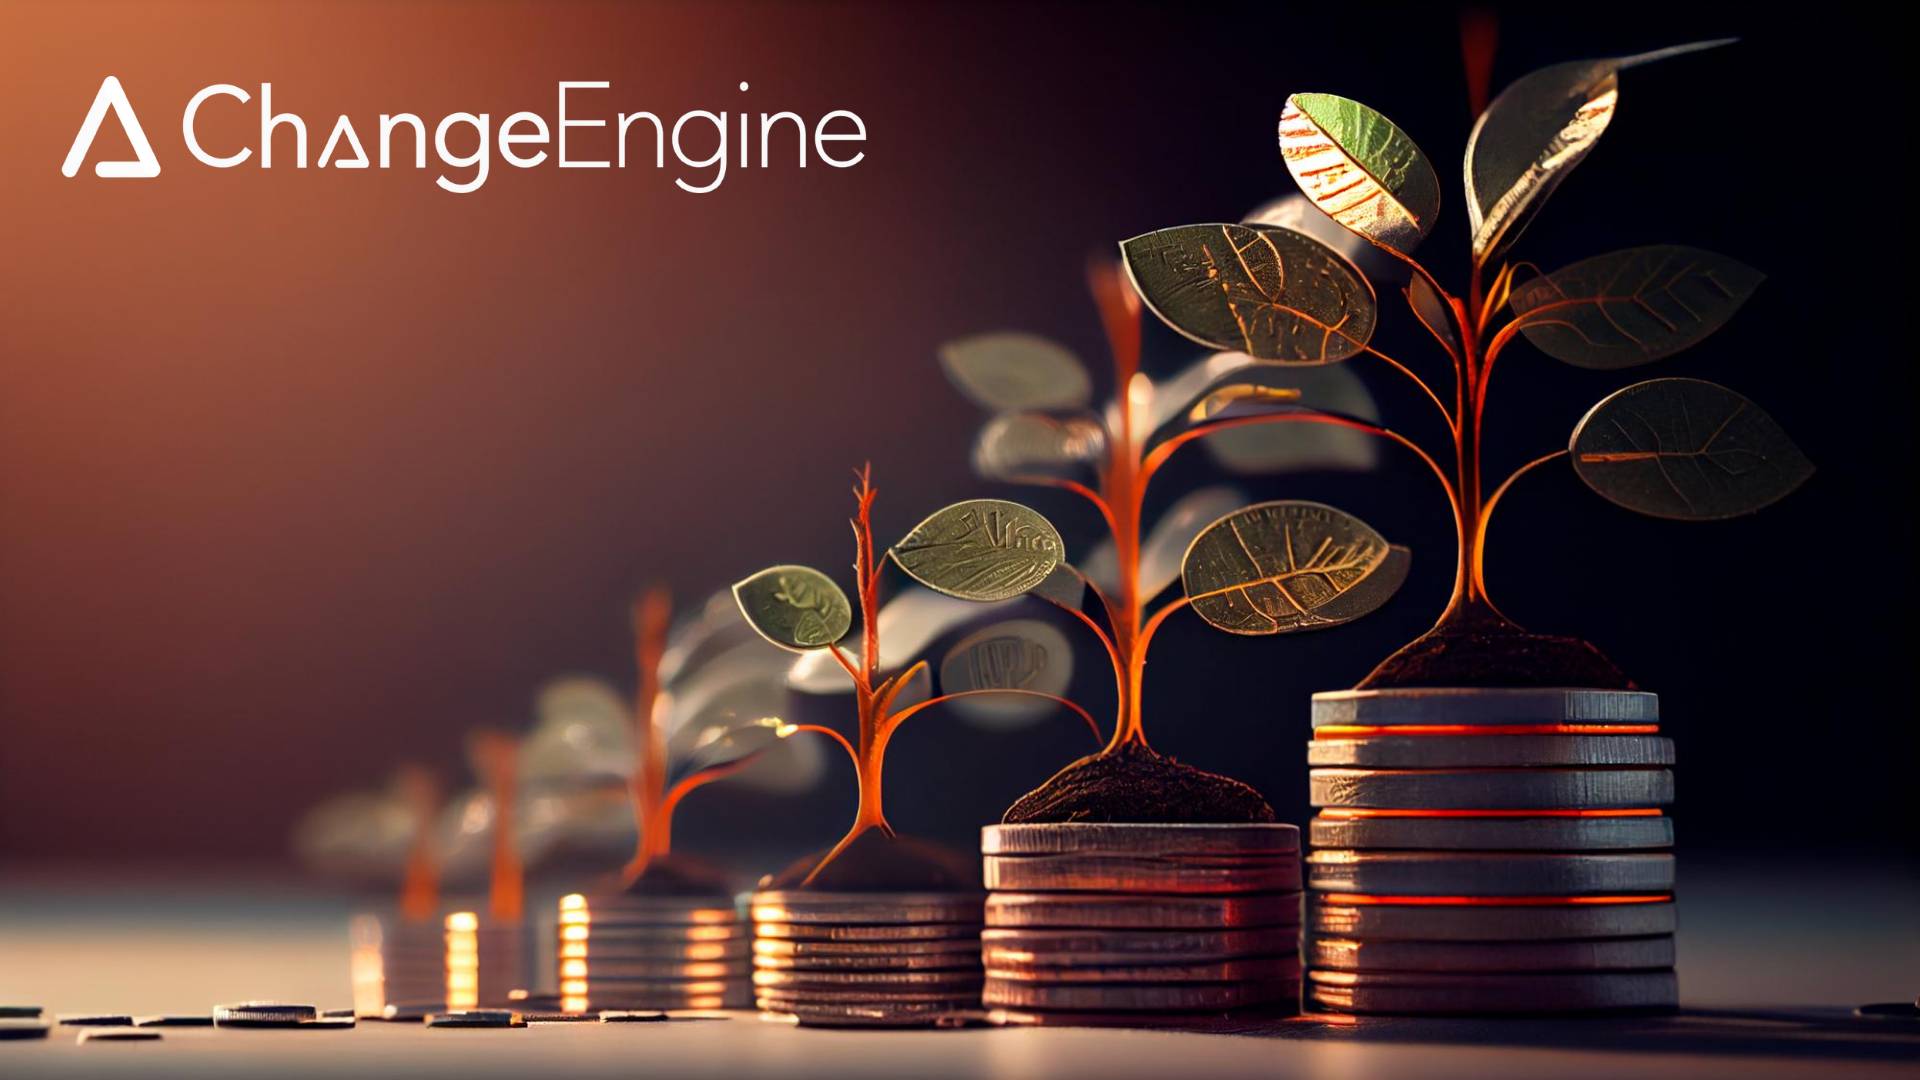 ChangeEngine Secures $10M Series A to Revolutionize Internal Marketing & People Design